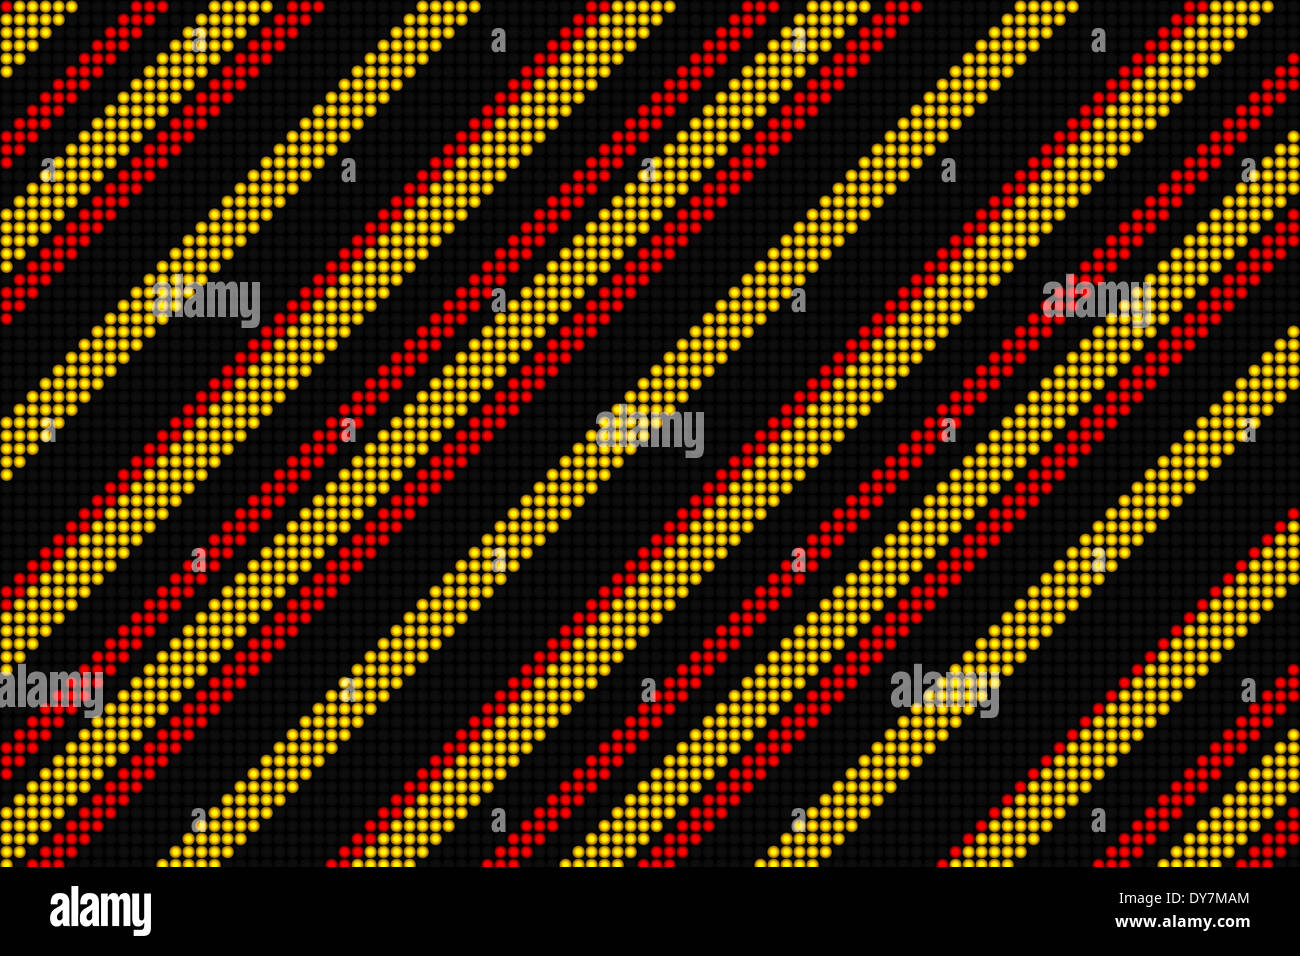 Cool linear pattern in black red and yellow Stock Photo